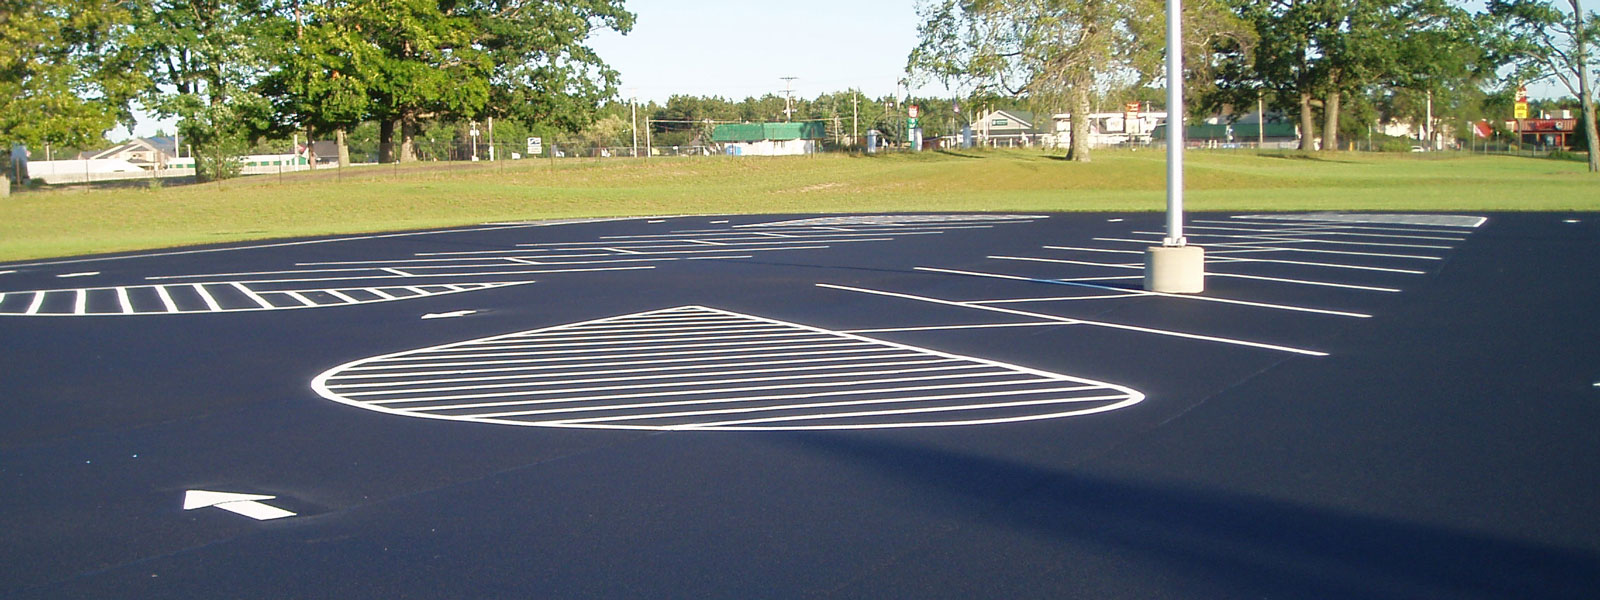 parking lot asphalt sealing and striping services in mason and manistee counties and surrounding areas.